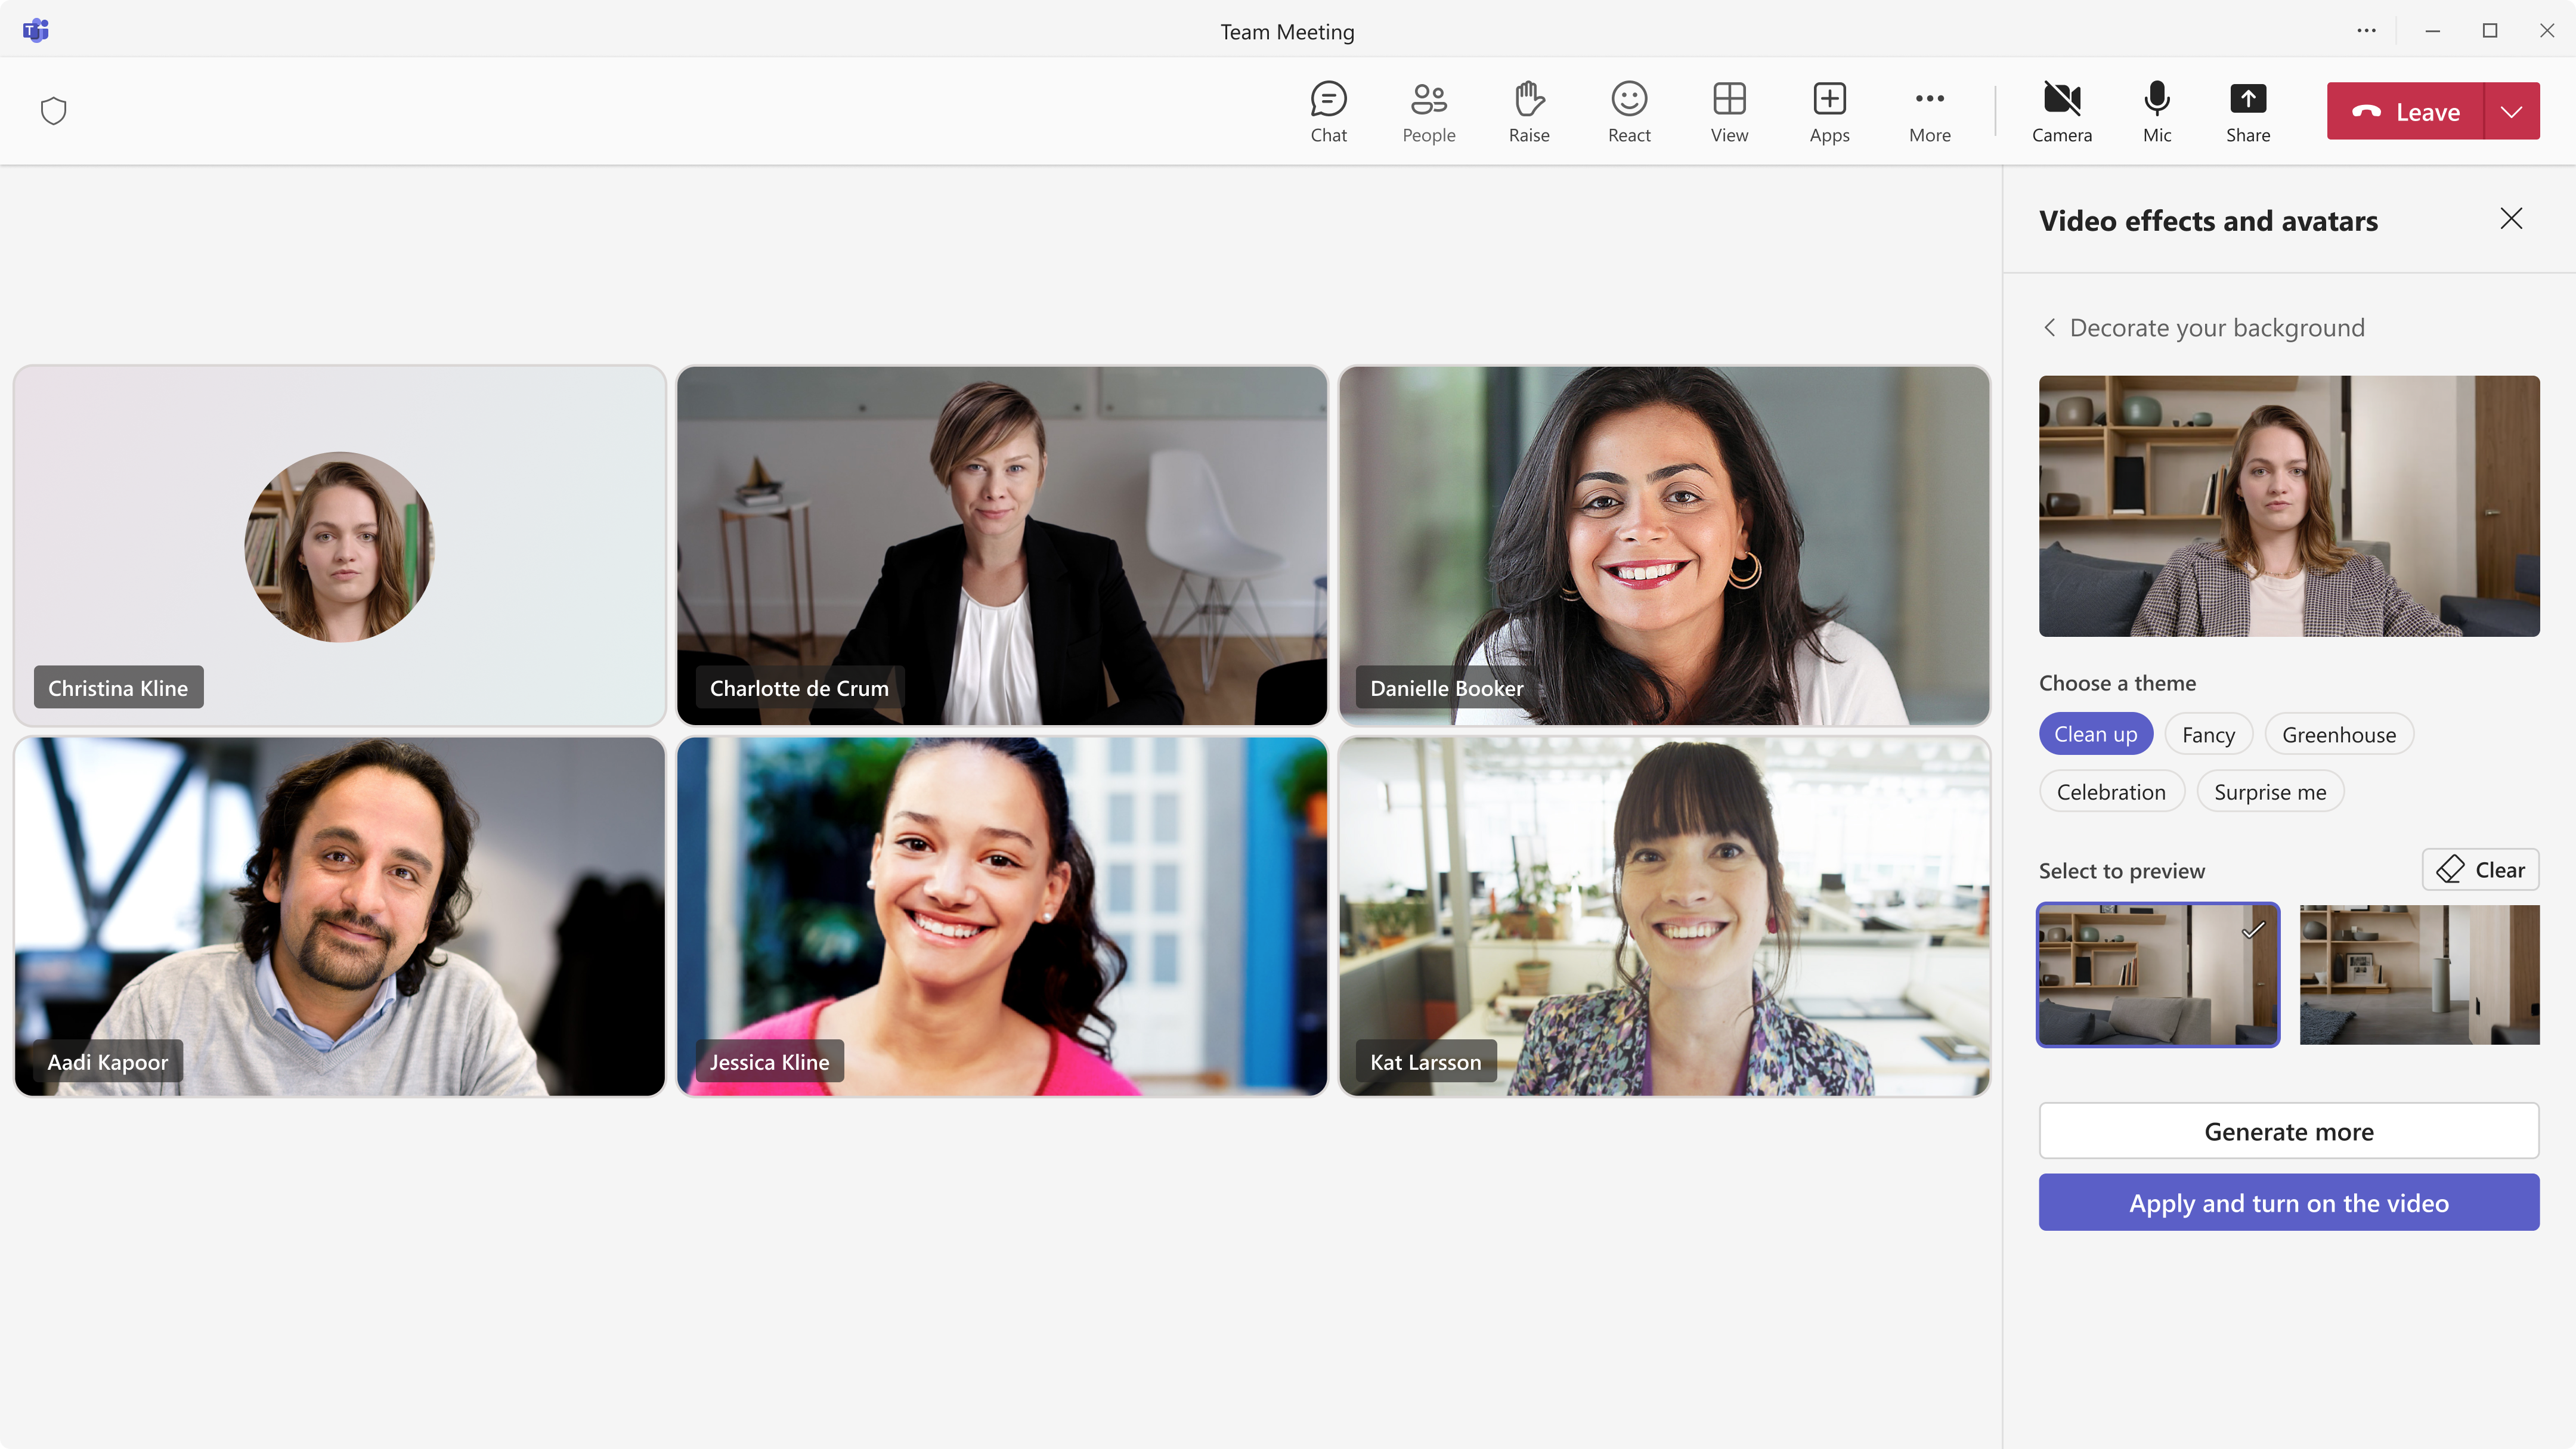 Video effects and avatar pane during a meeting